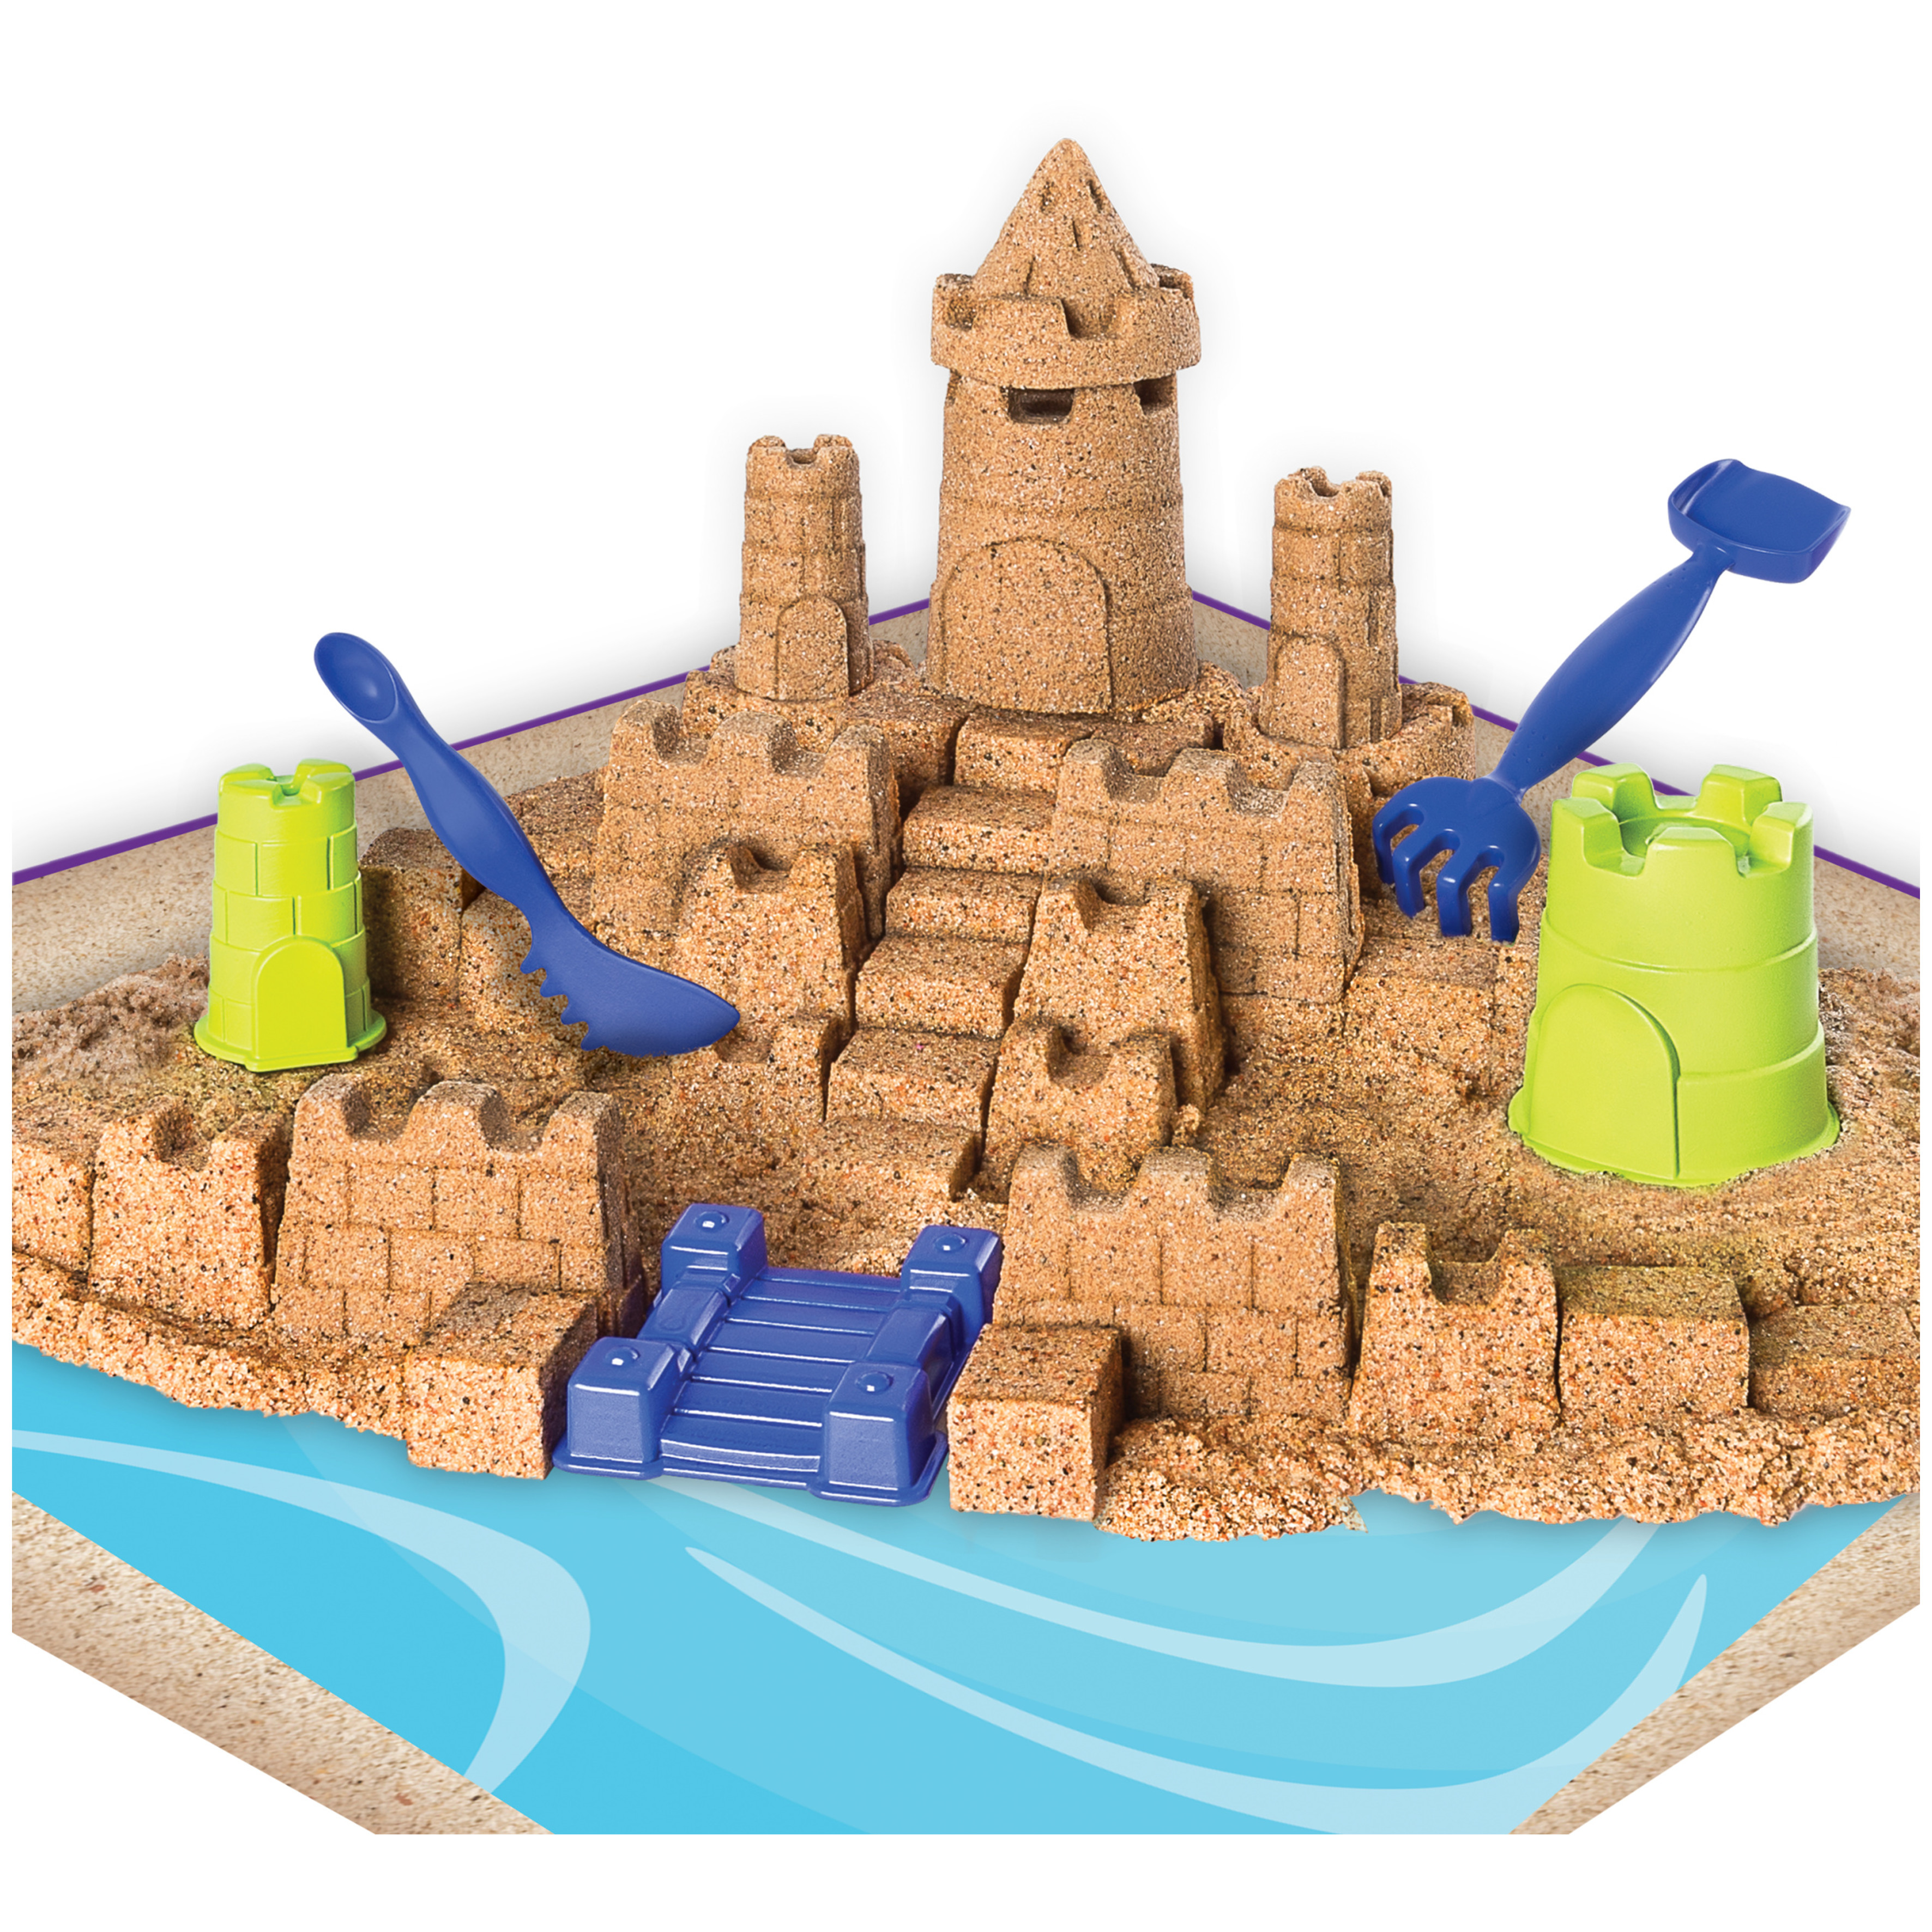 Kinetic Sand Beach Sand Kingdom Playset with 3lbs of Beach Sand, includes Molds and Tools, Play Sand Sensory Toys for Kids Ages 3 and up - image 4 of 9